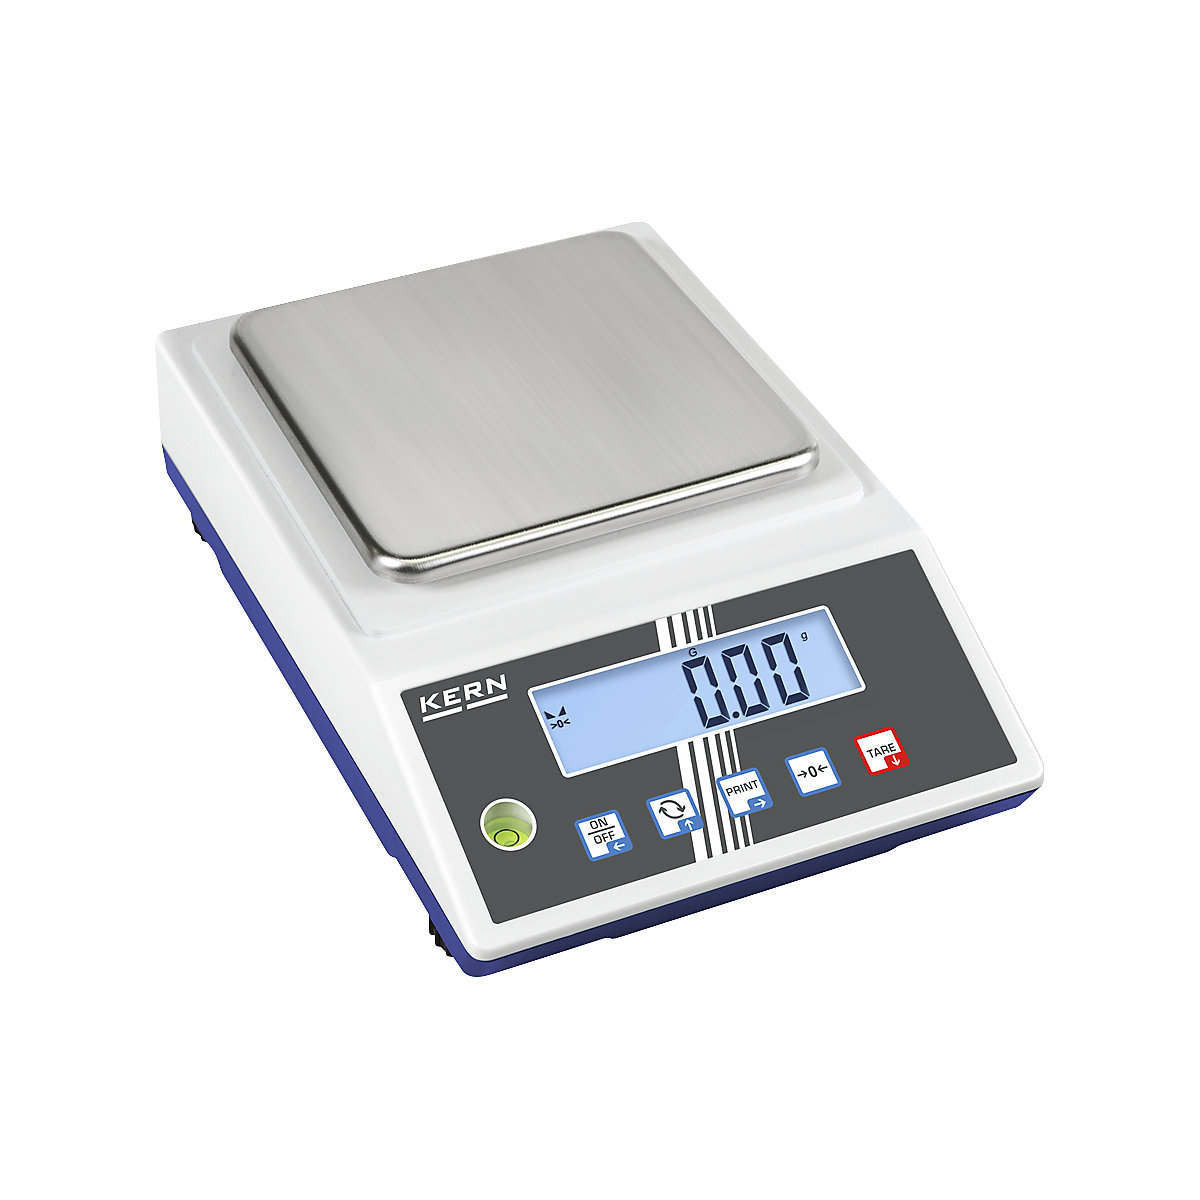 IoT-Line compact laboratory scales, weighing plate 130 x 130 mm, weighing range up to 1.2 kg, read-out accuracy 0.01 g-2